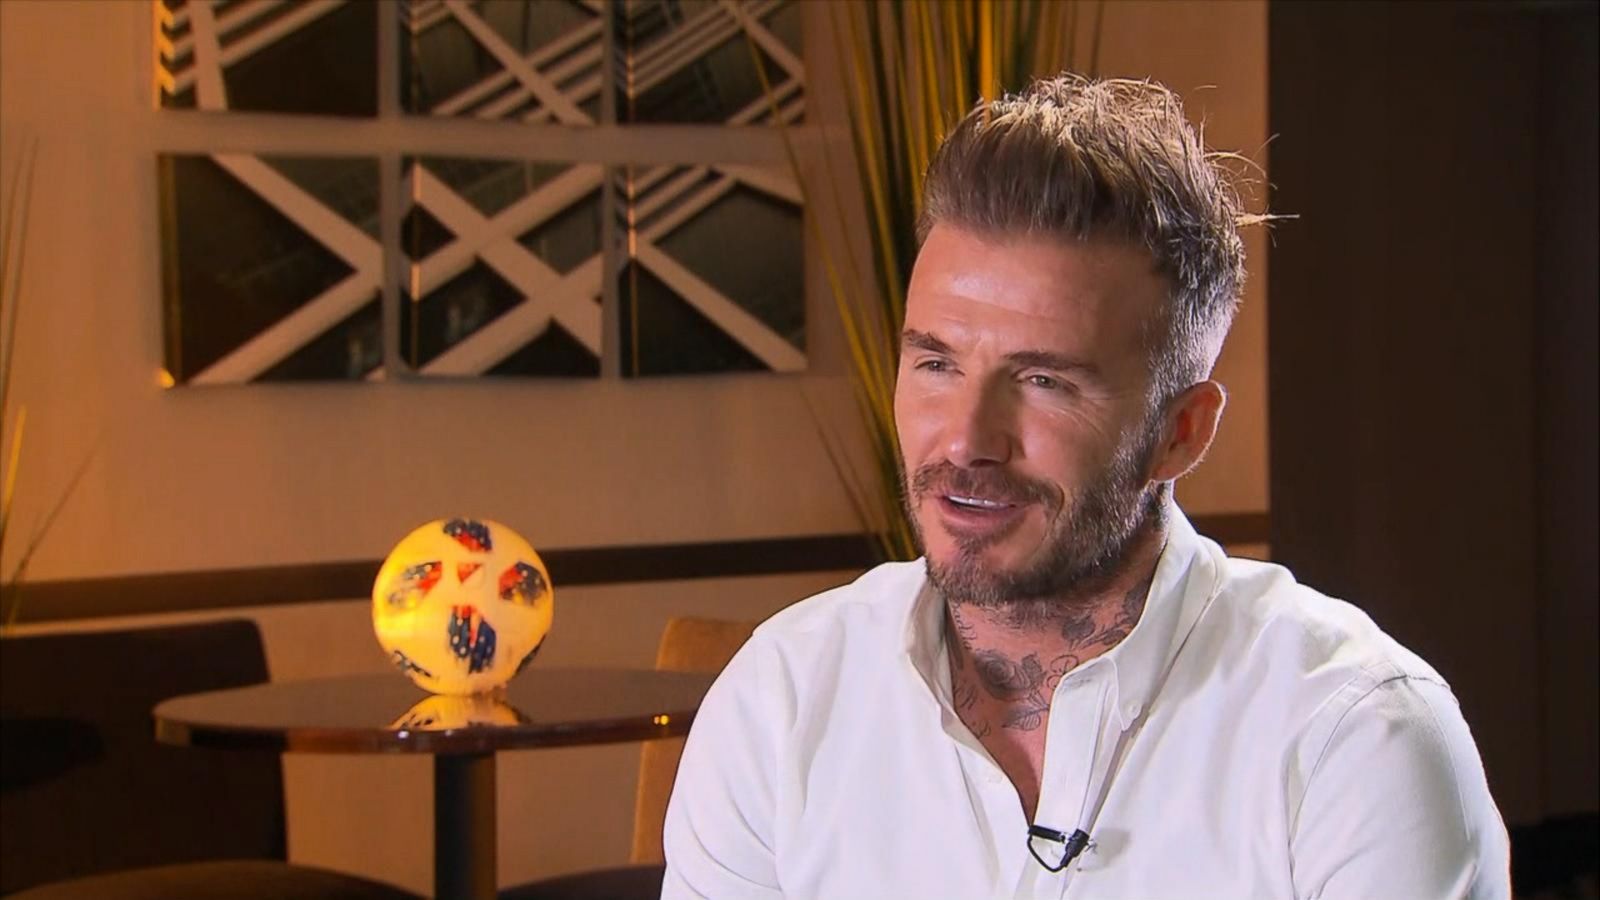 How does David Beckham nap with his pup? By wrapping her in a